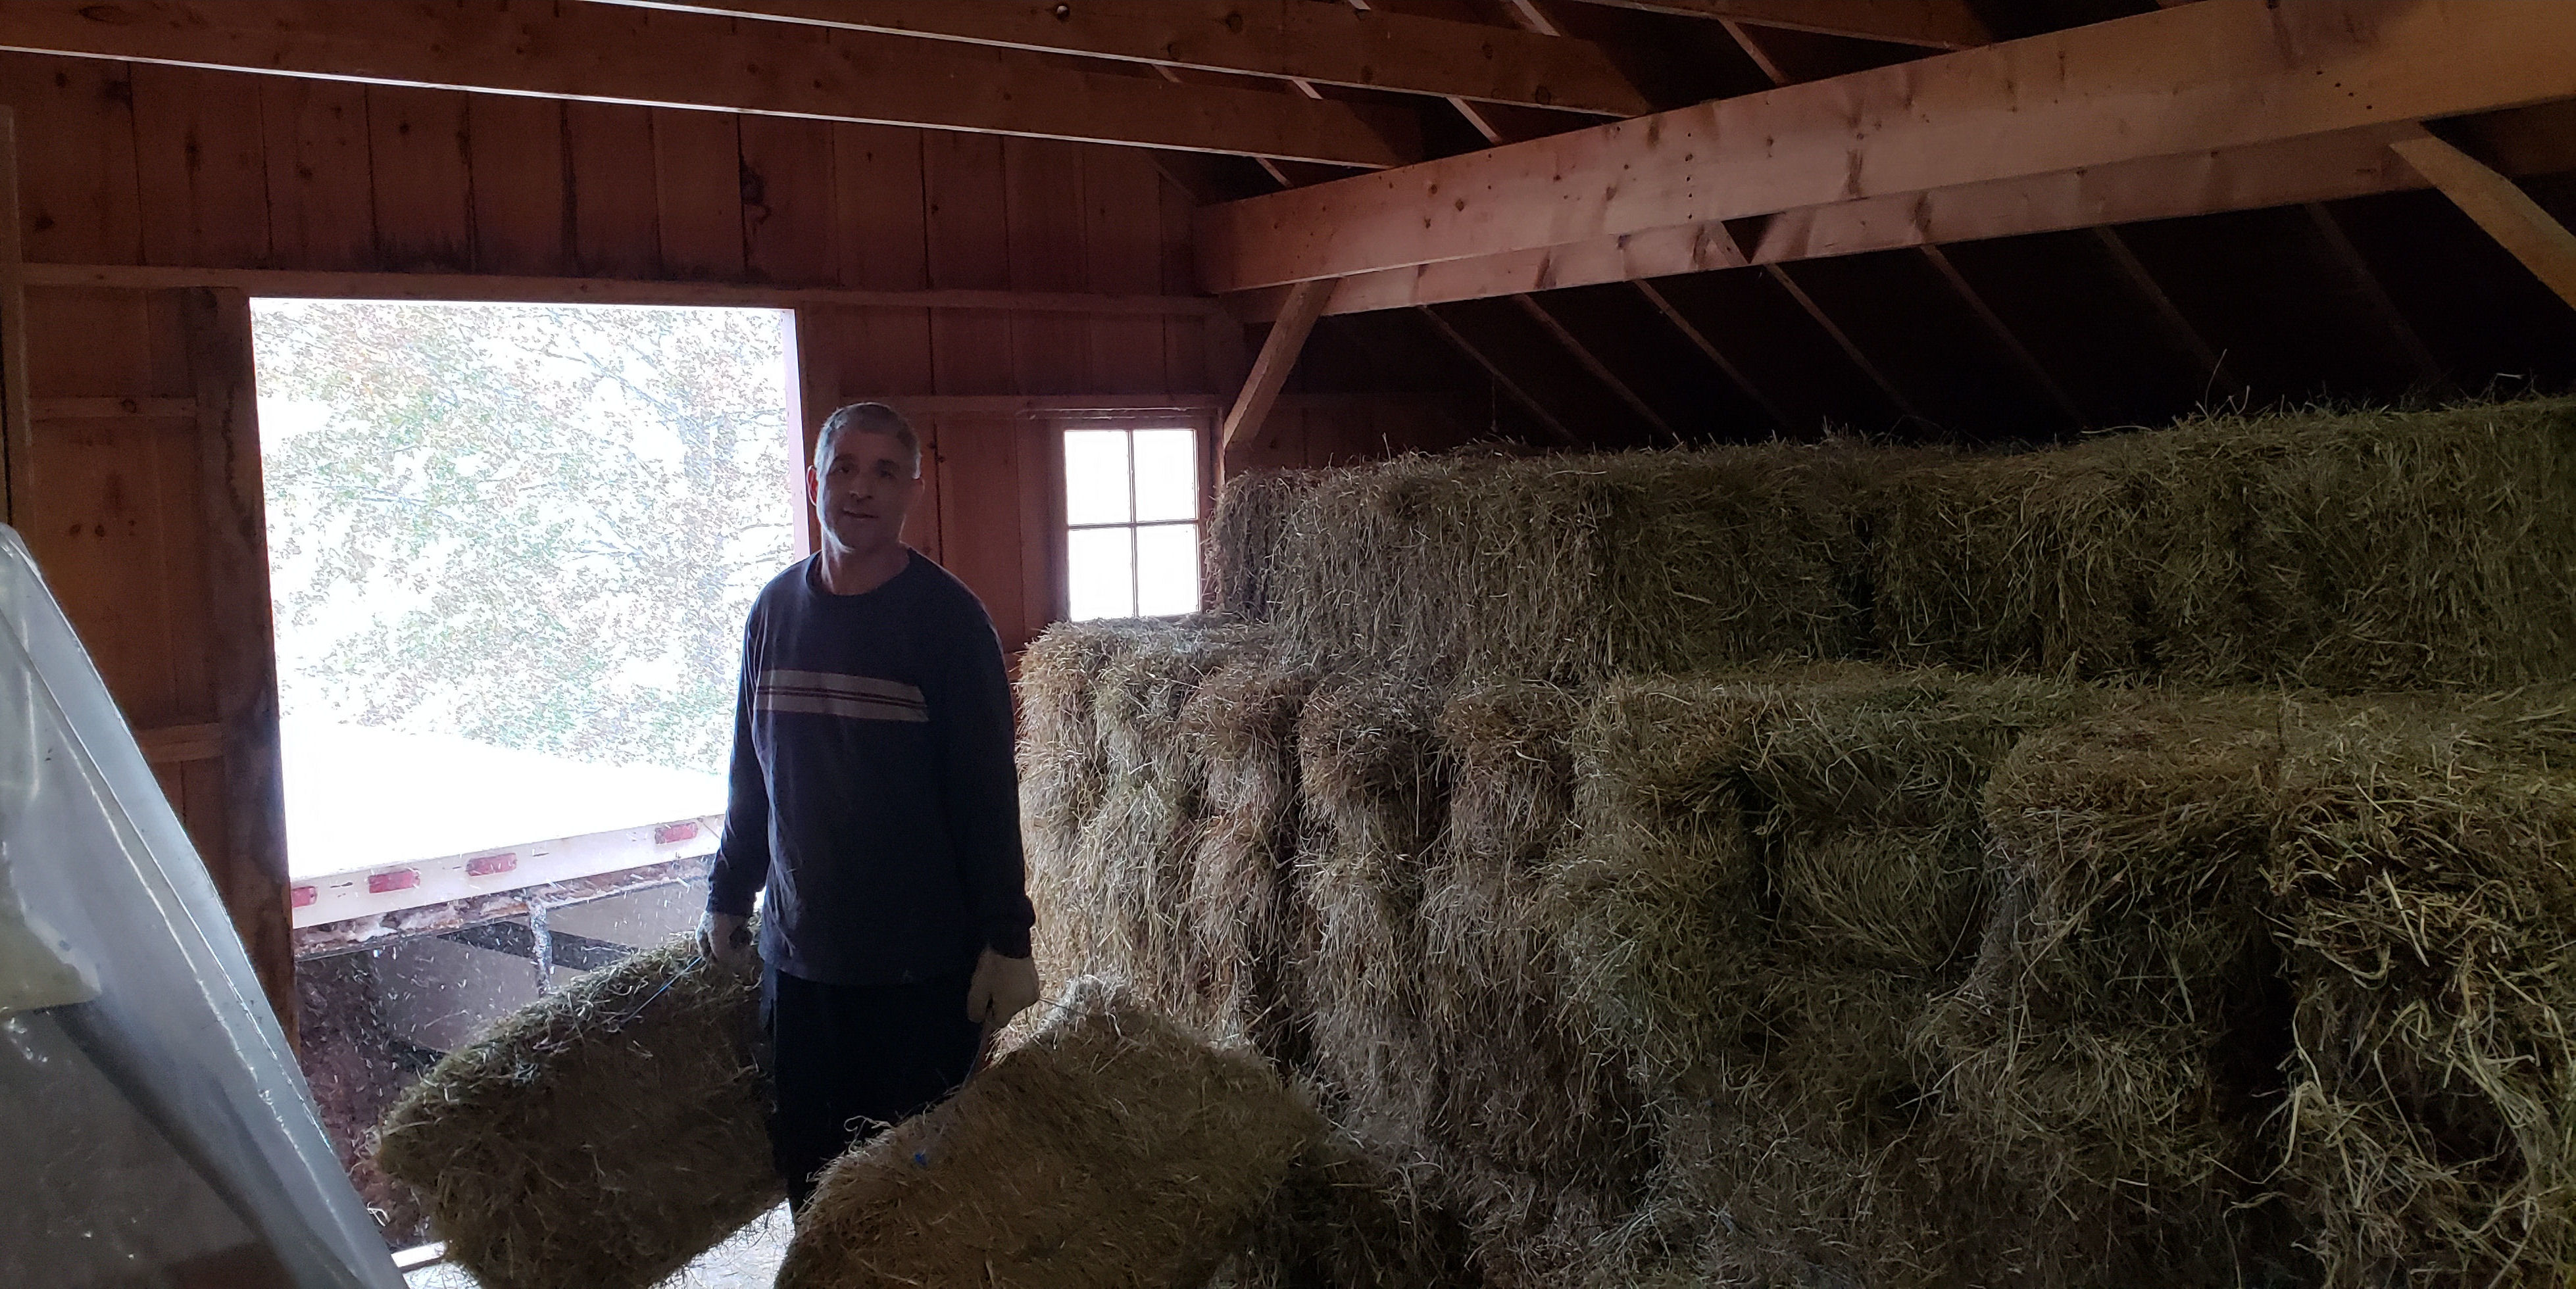 Tristain, our hay supplier stocking the loft